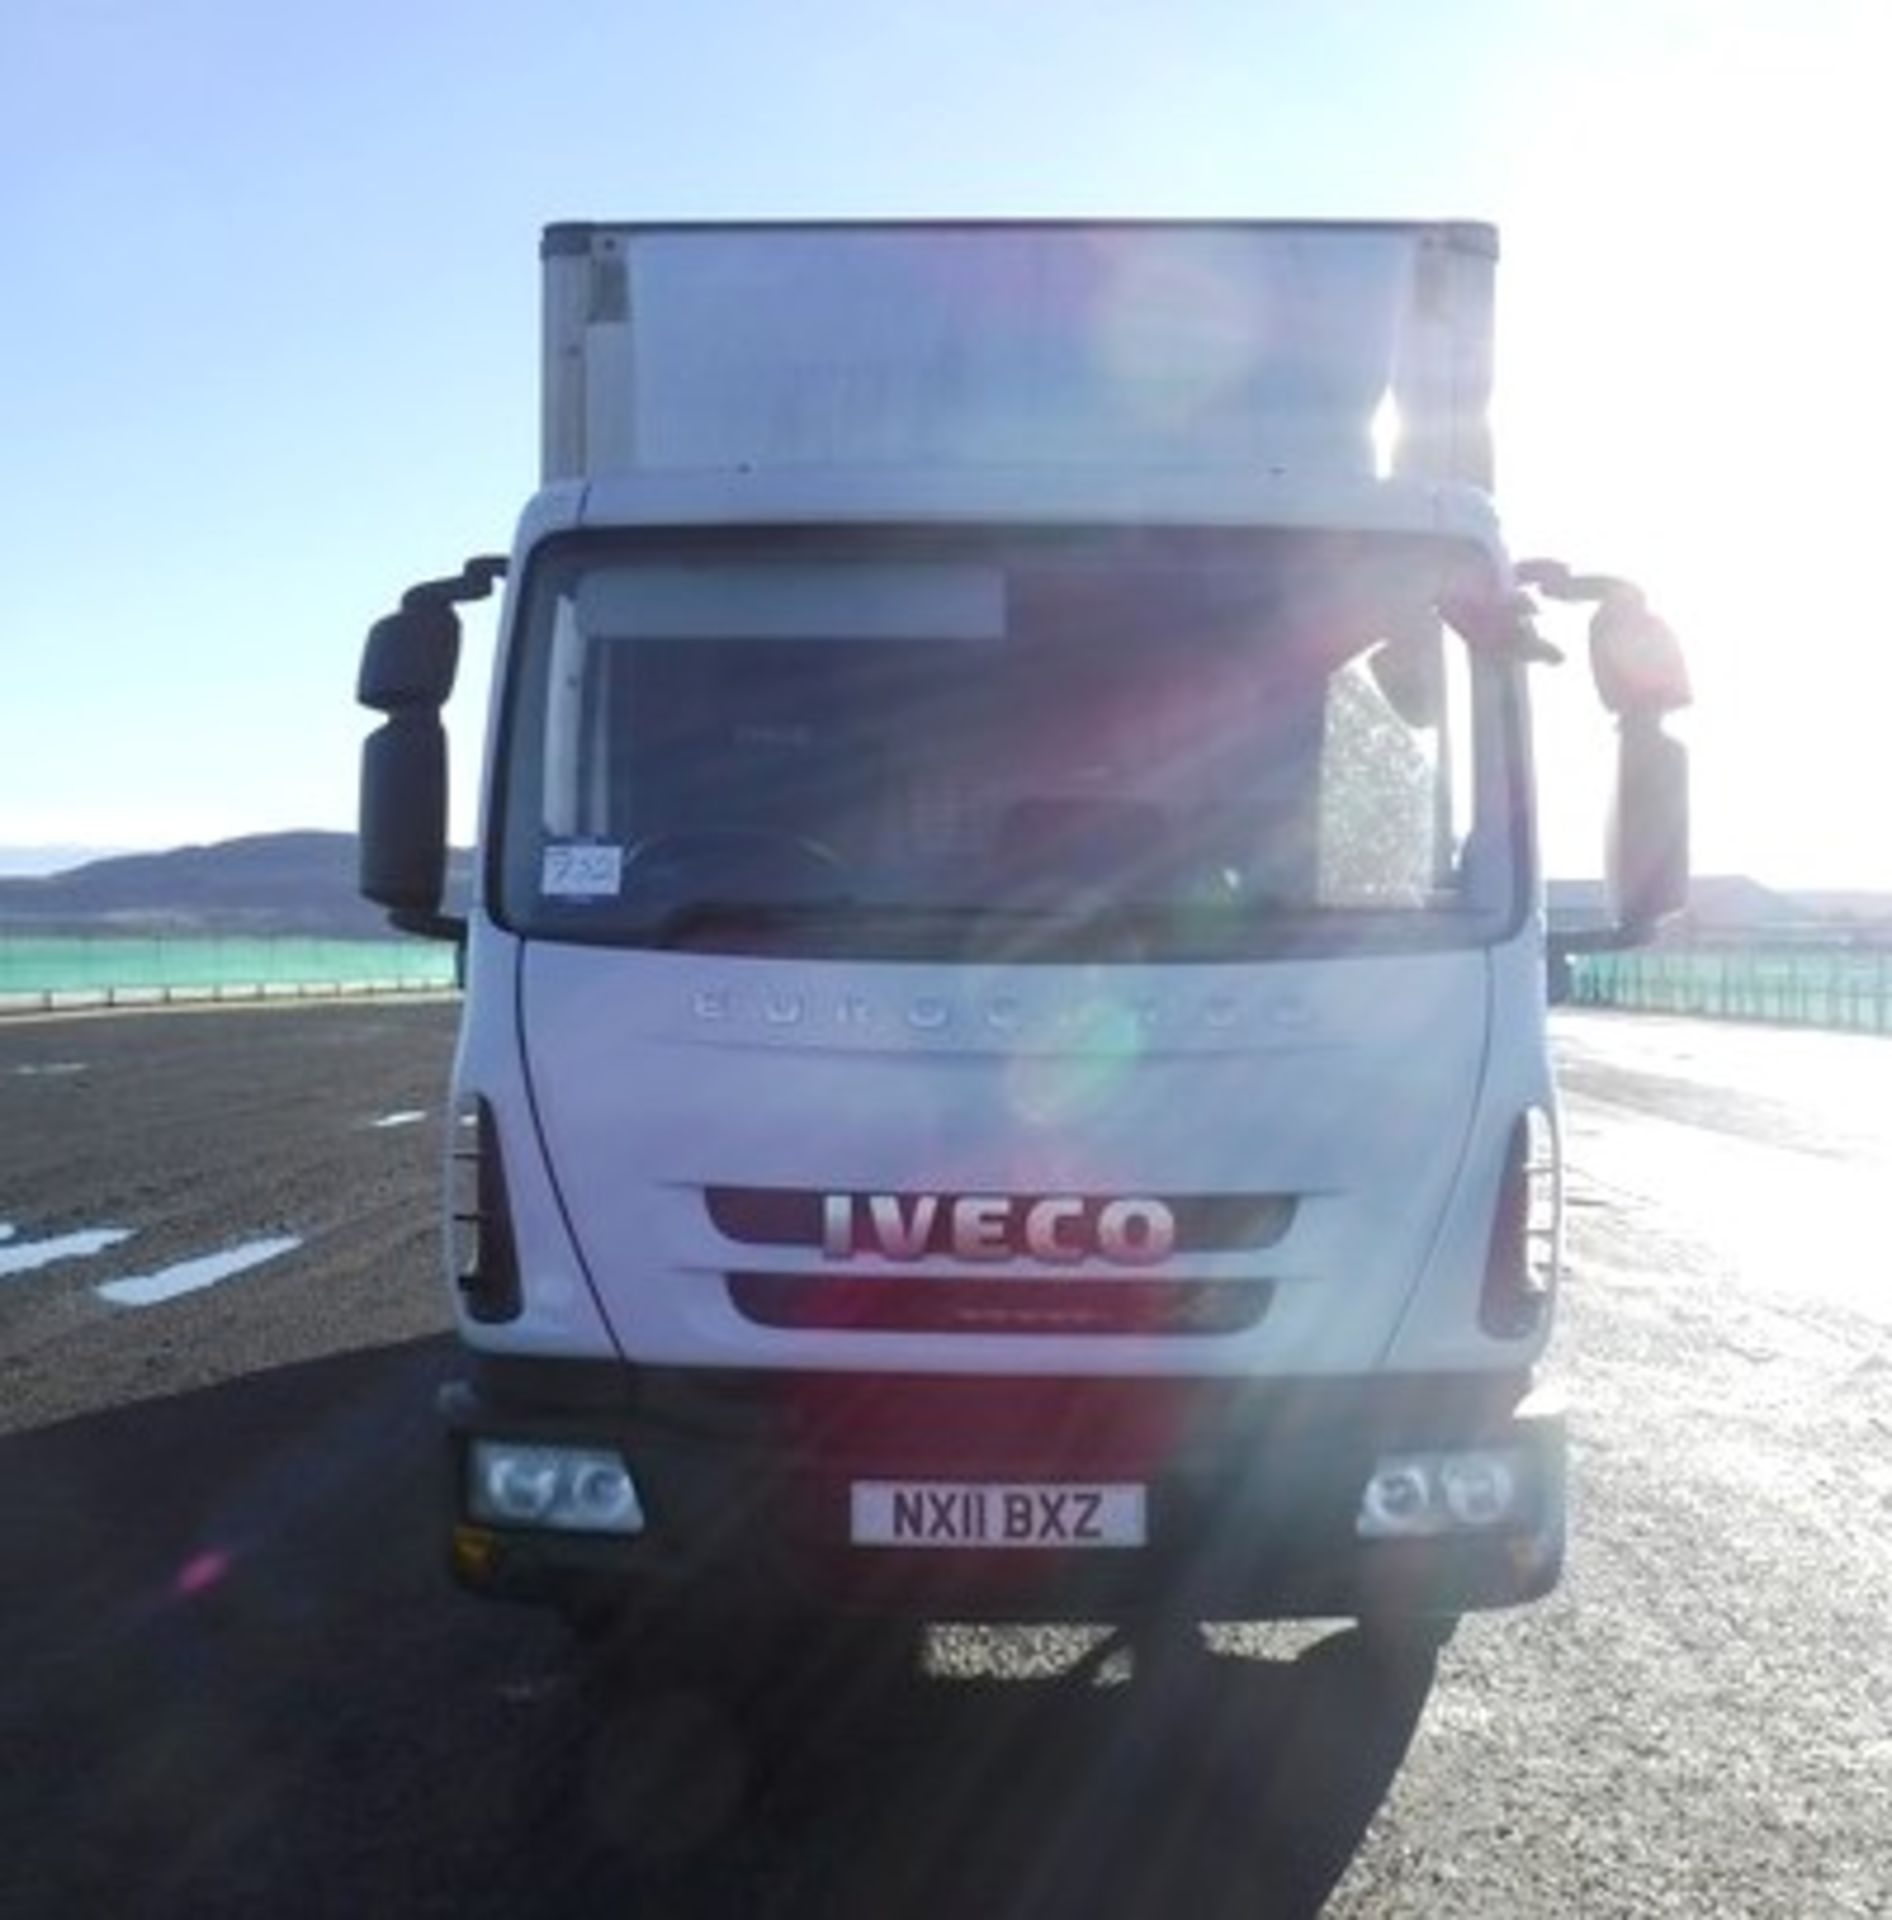 IVECO MODEL EUROCARGO (MY 2008) - 3920cc - Image 17 of 24